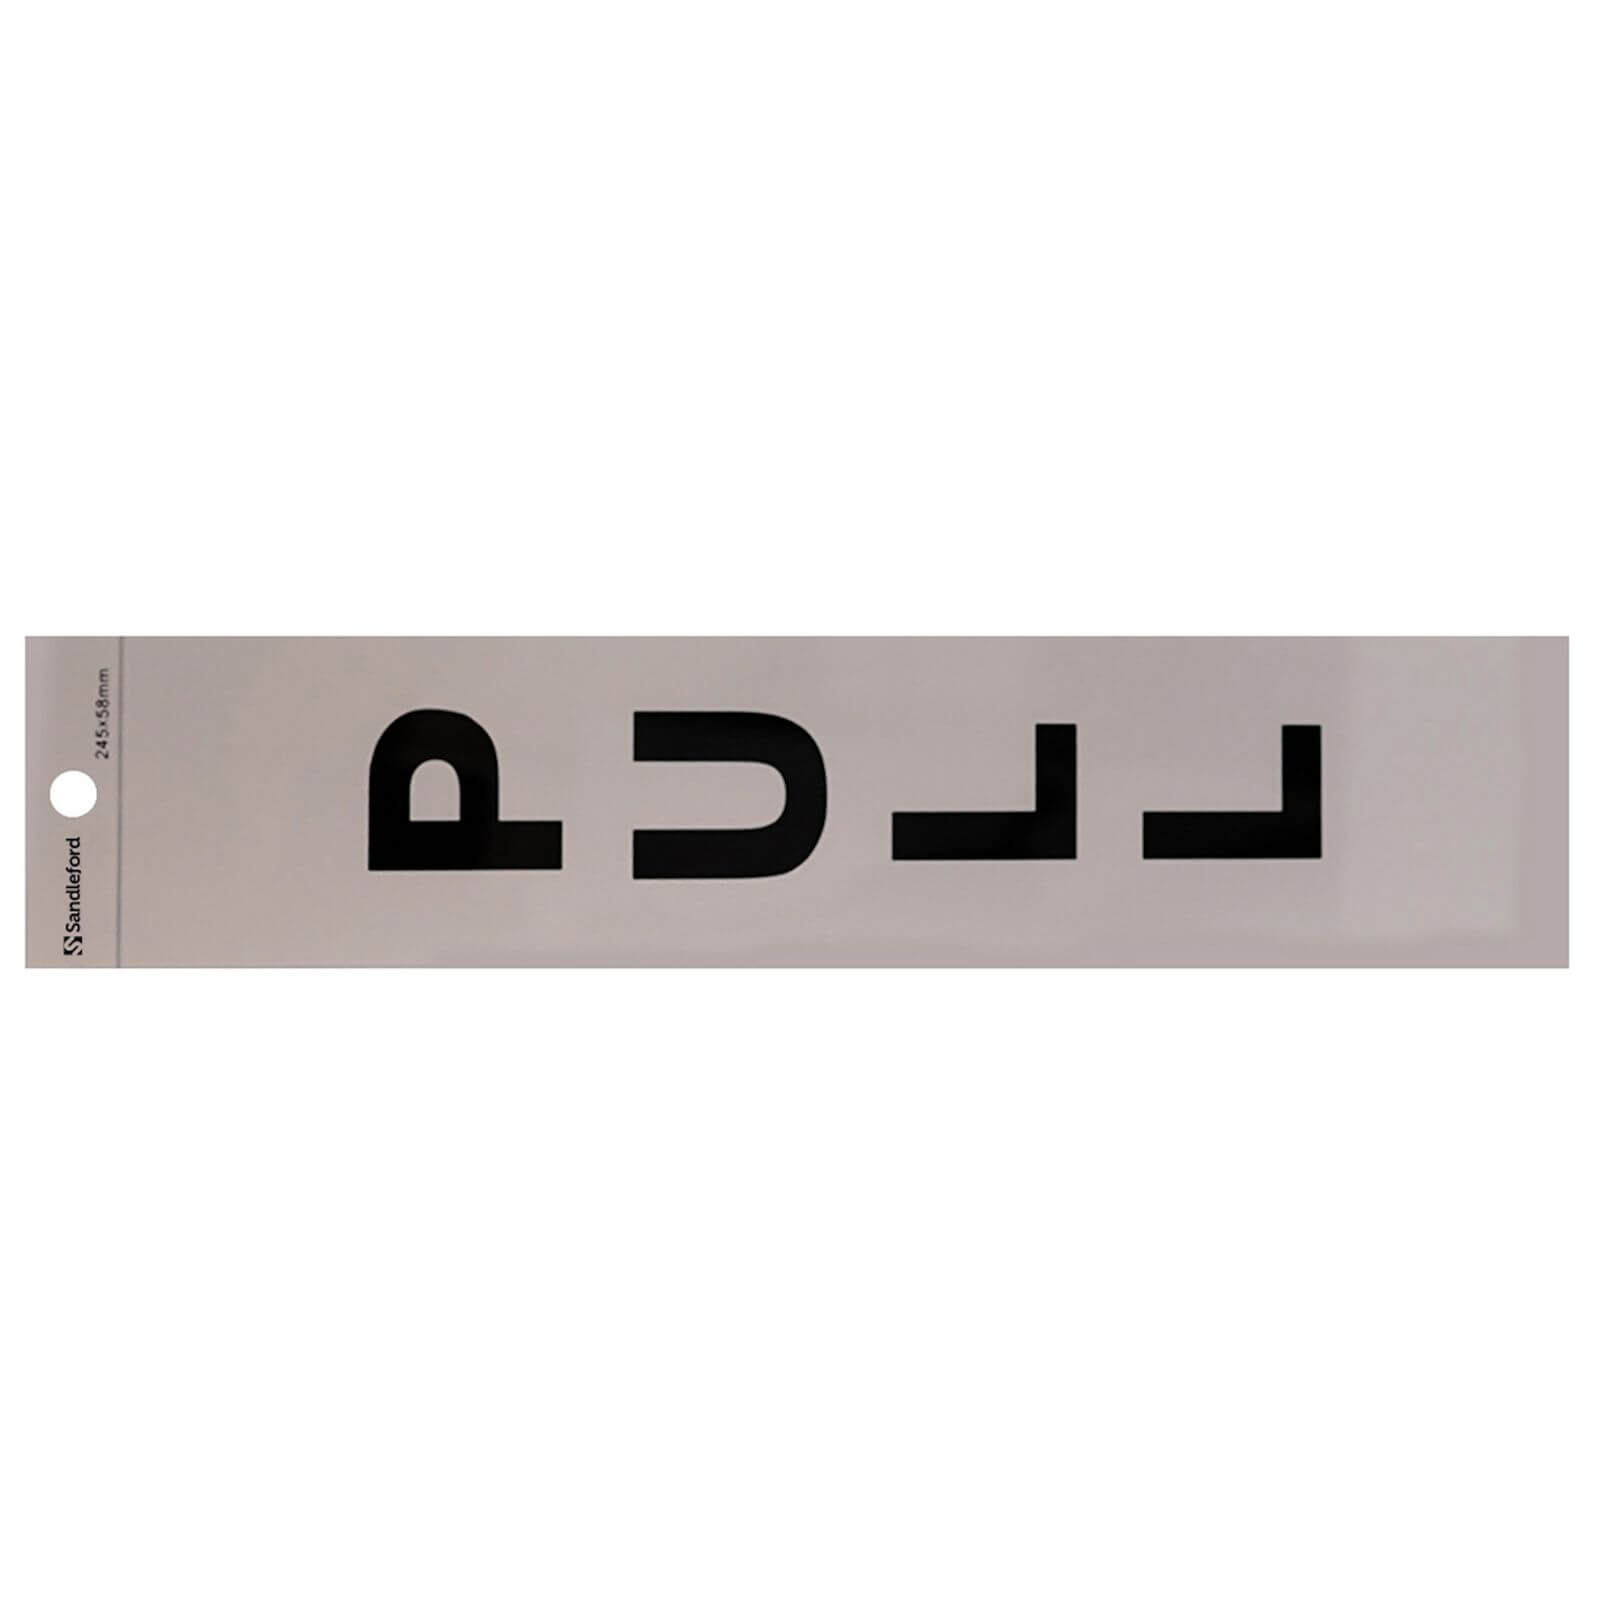 Self Adhesive Pull Sign - 245 x 58mm